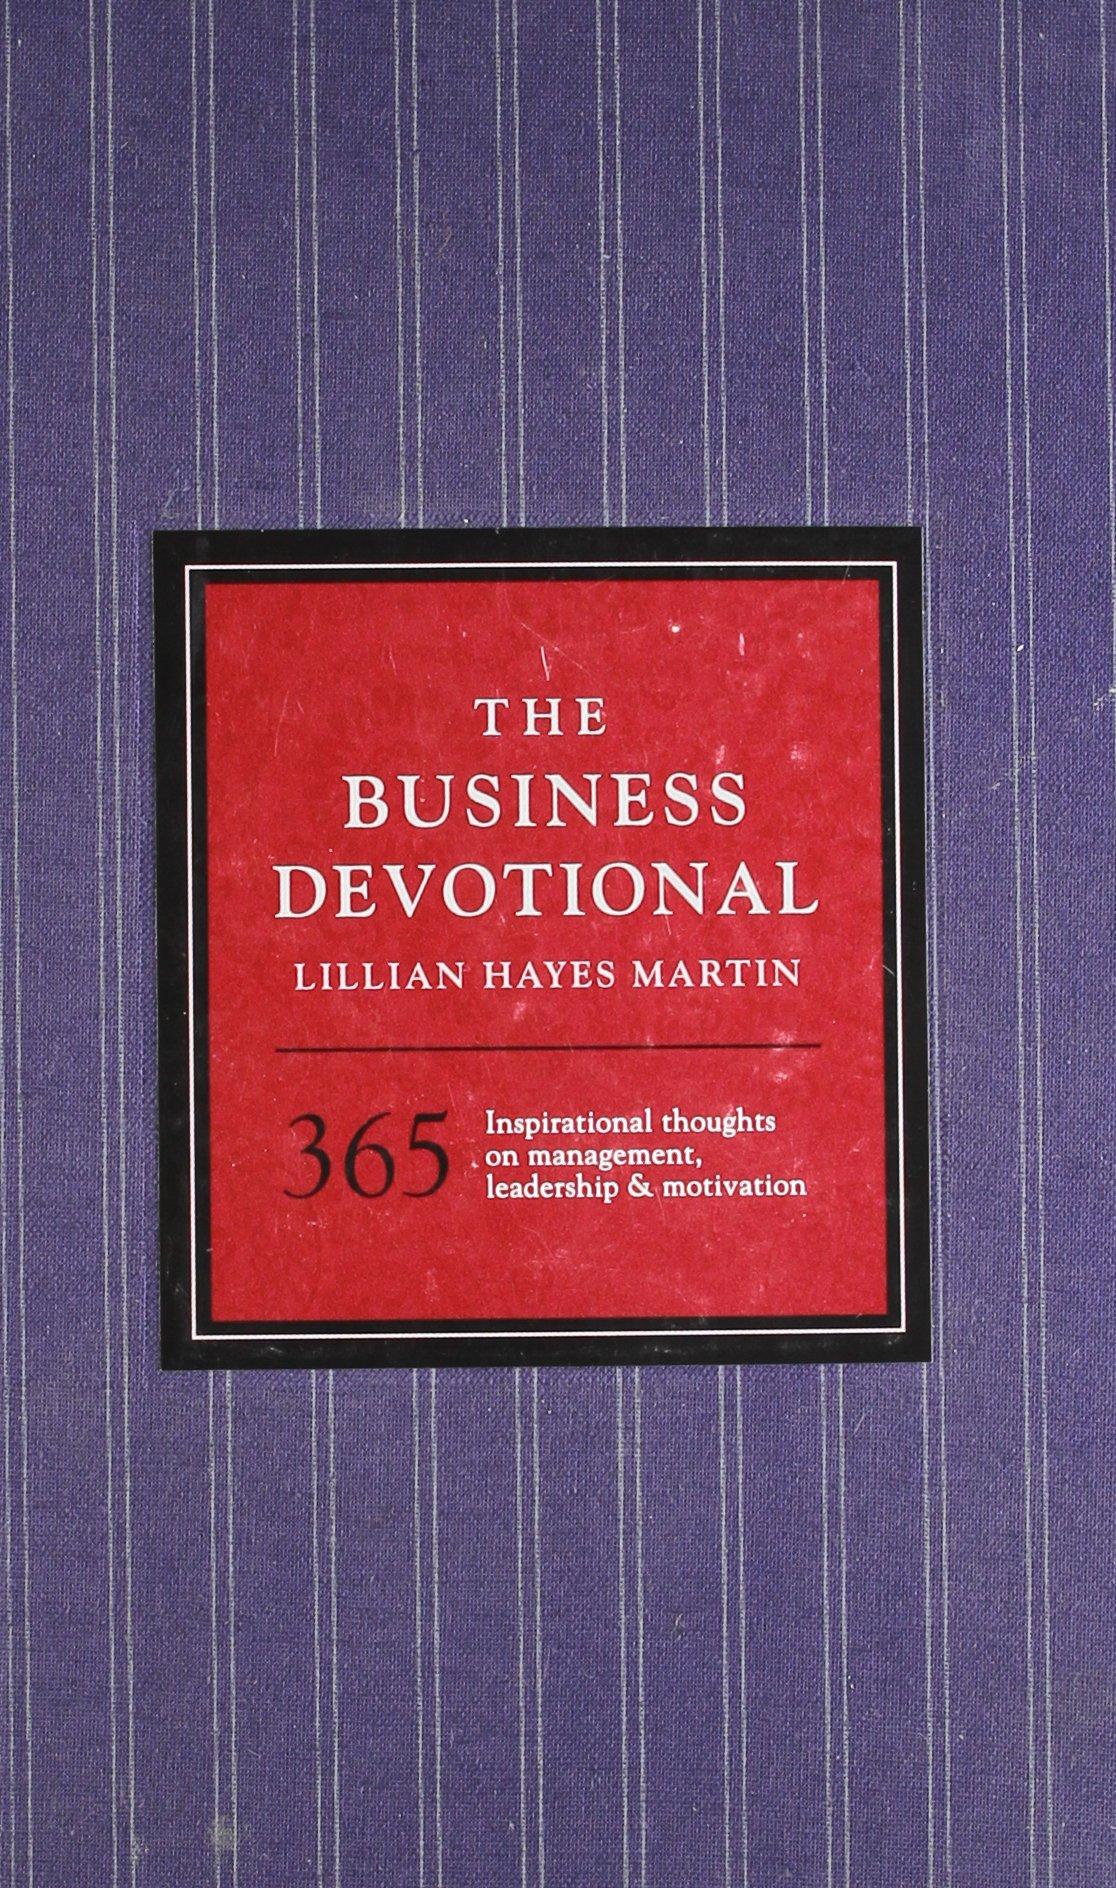 The Business Devotional 365 Inspirational Thoughts On Management Leadership And Motivation